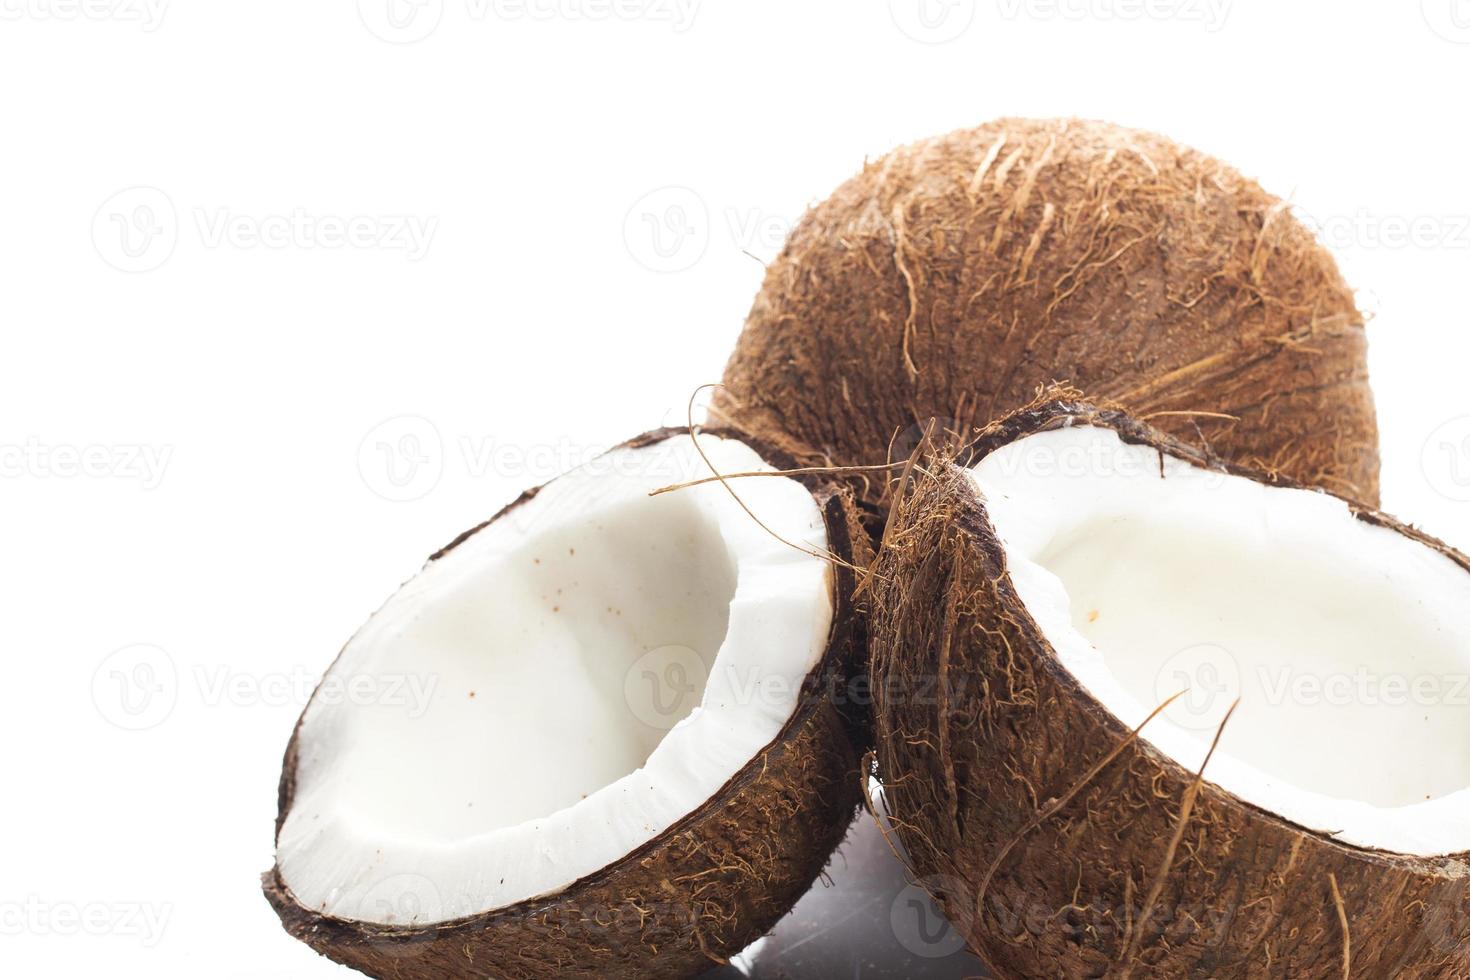 Coconuts on white background photo